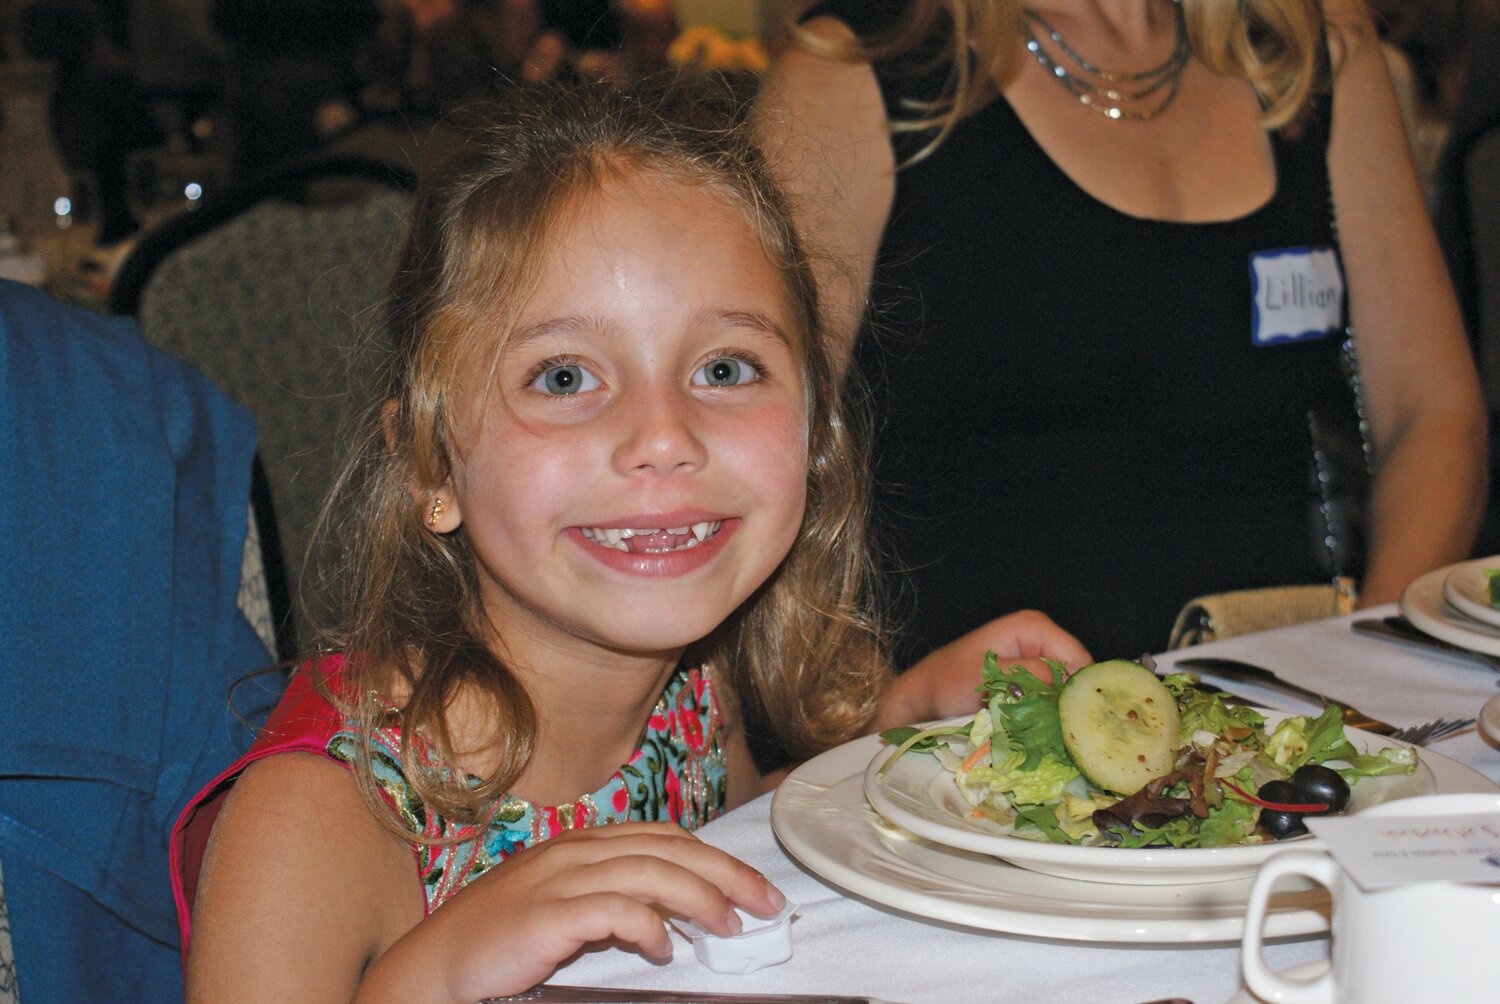 EATING A SALAD: Stella Chadwick, seven years old,  attends the ceremony with her mother,  Faculty Member Lillian Chadwick. (Photo by Steve Popiel)